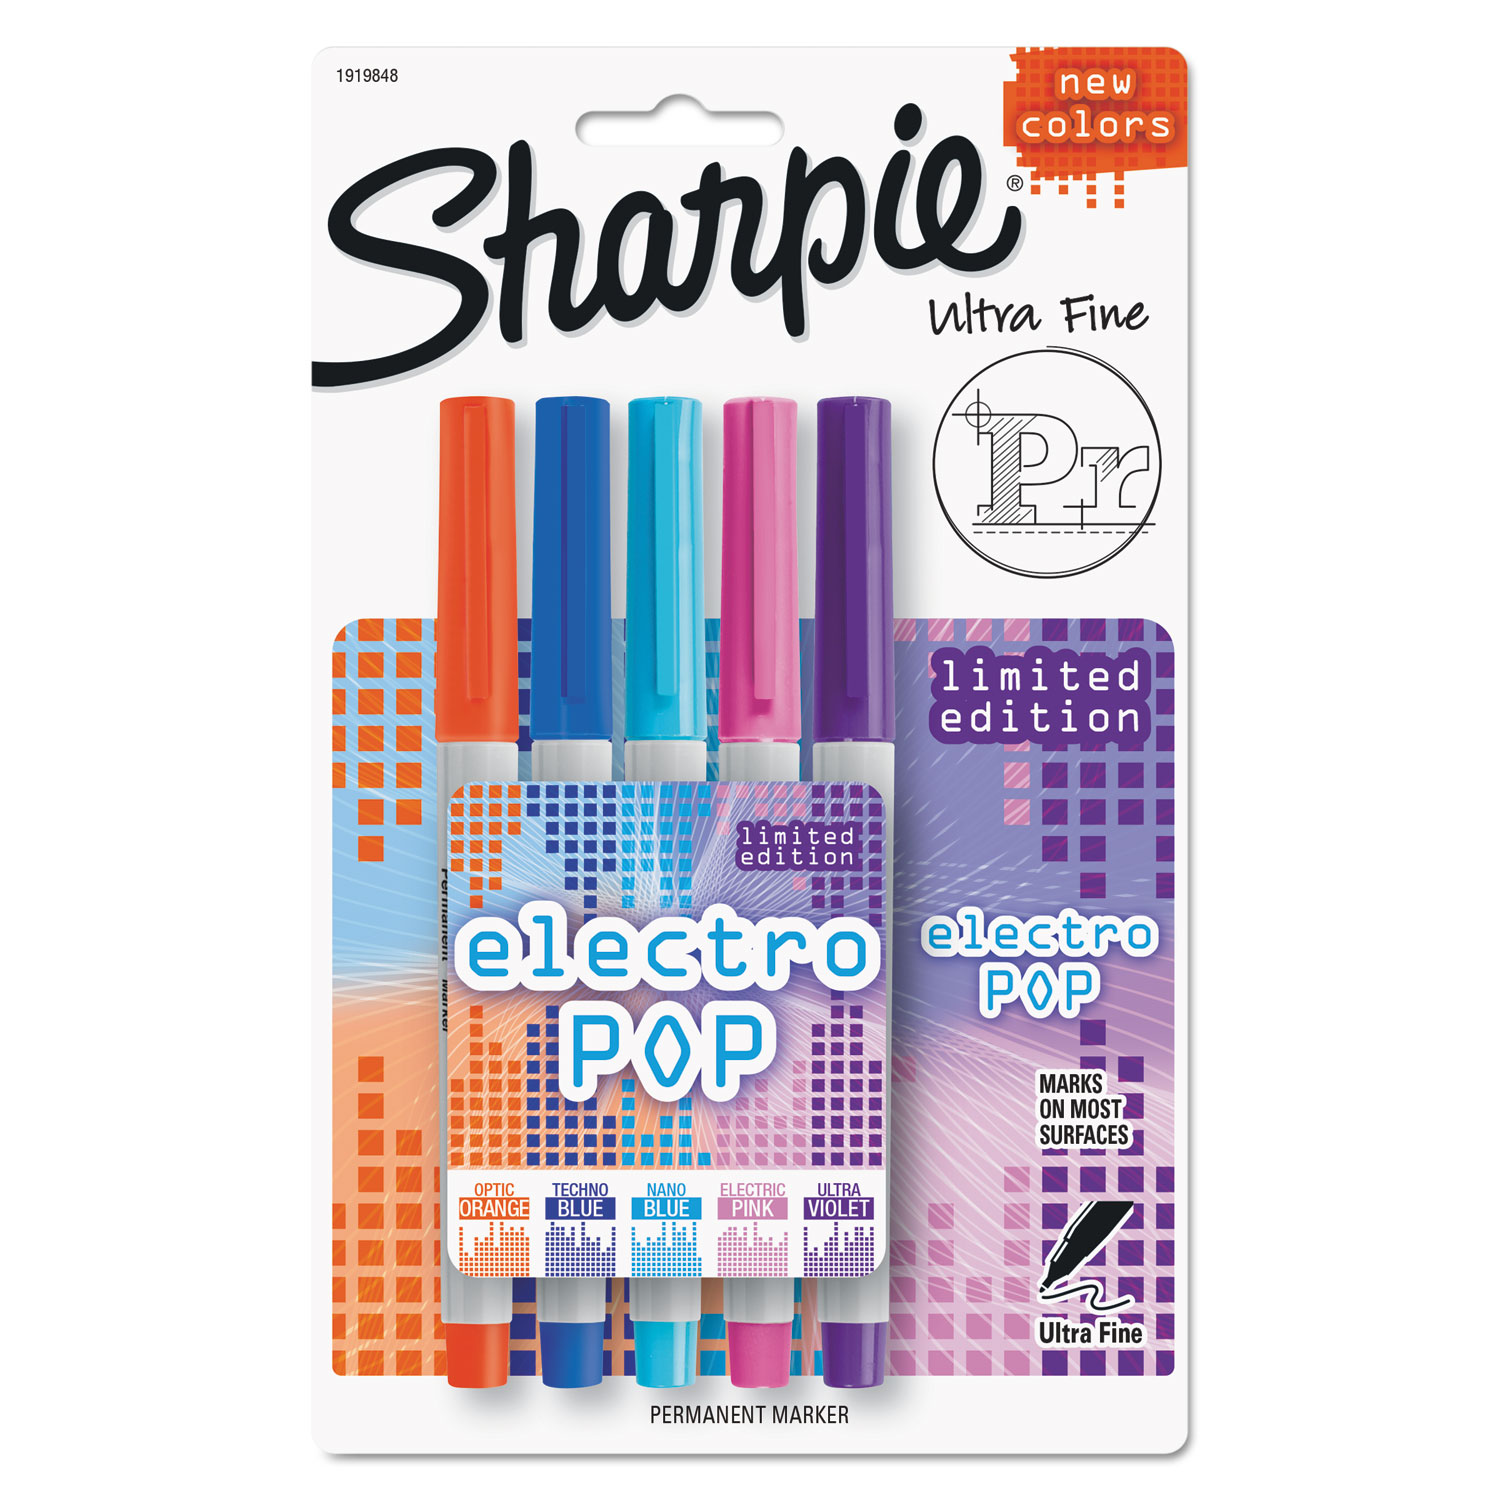  Sharpie 1919848 Ultra Fine Electro Pop Marker, Extra-Fine Needle Tip, Assorted Colors, 5/Pack (SAN1919848) 